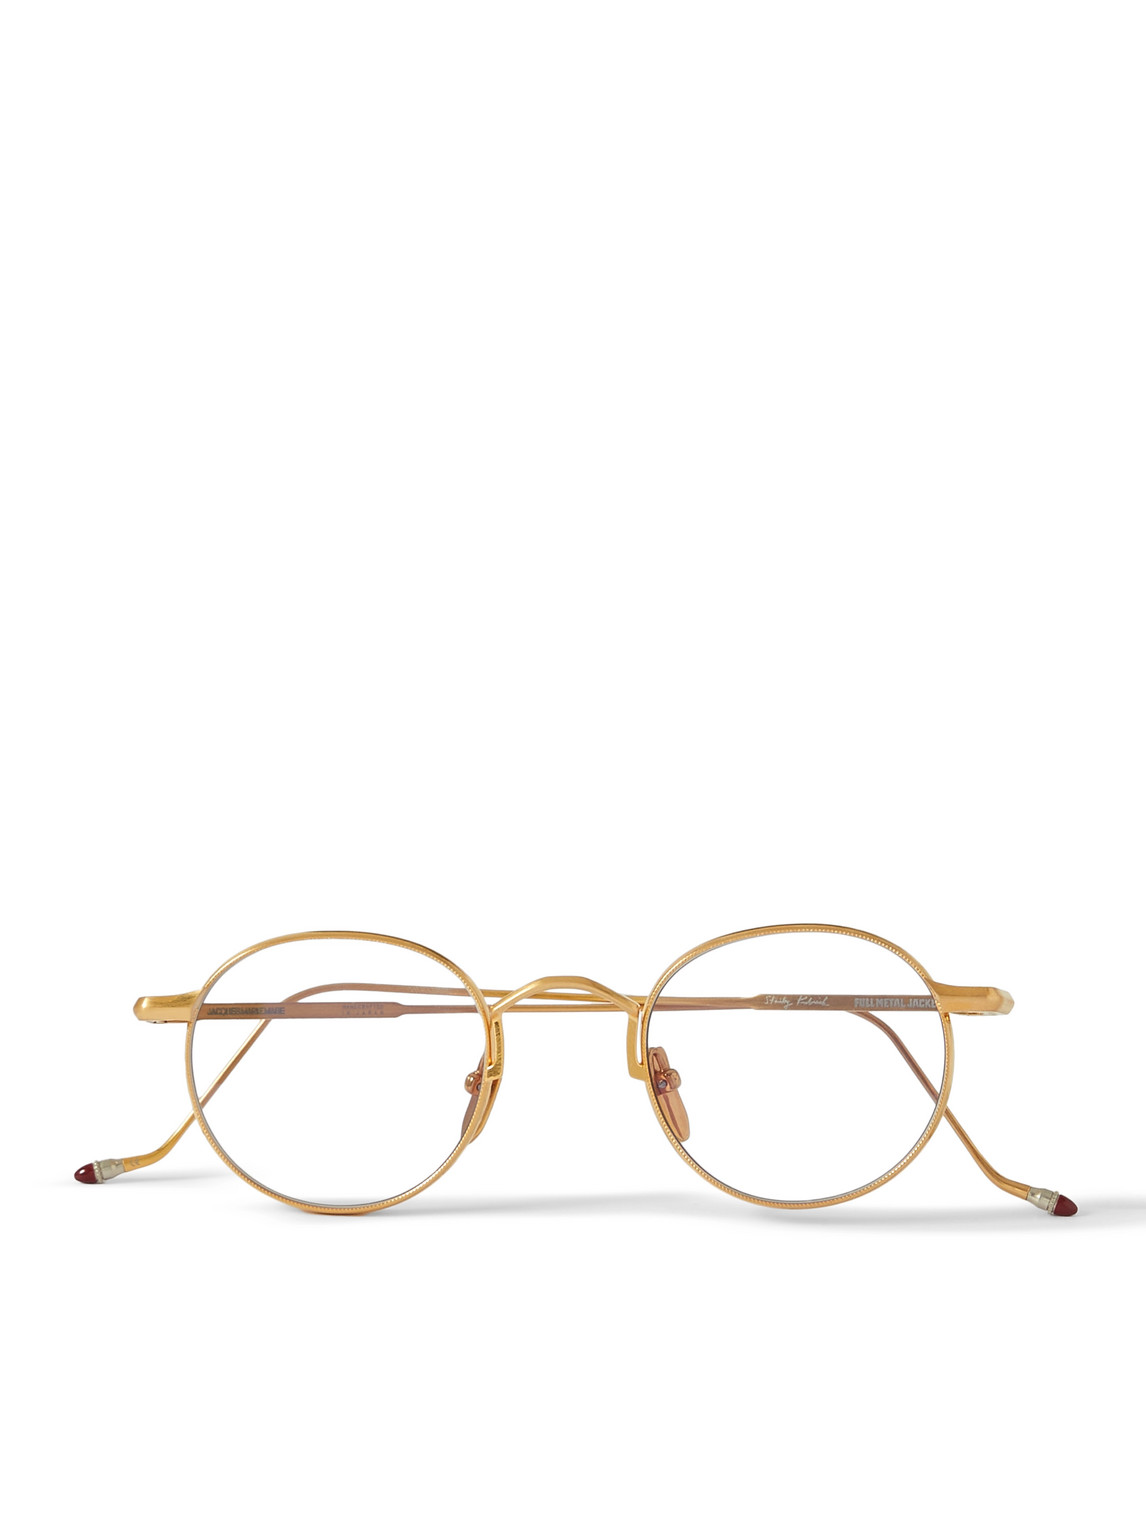 Jacques Marie Mage - Full Metal Jacket Round-Frame Gold-Tone Sunglasses - Men - Gold von Jacques Marie Mage